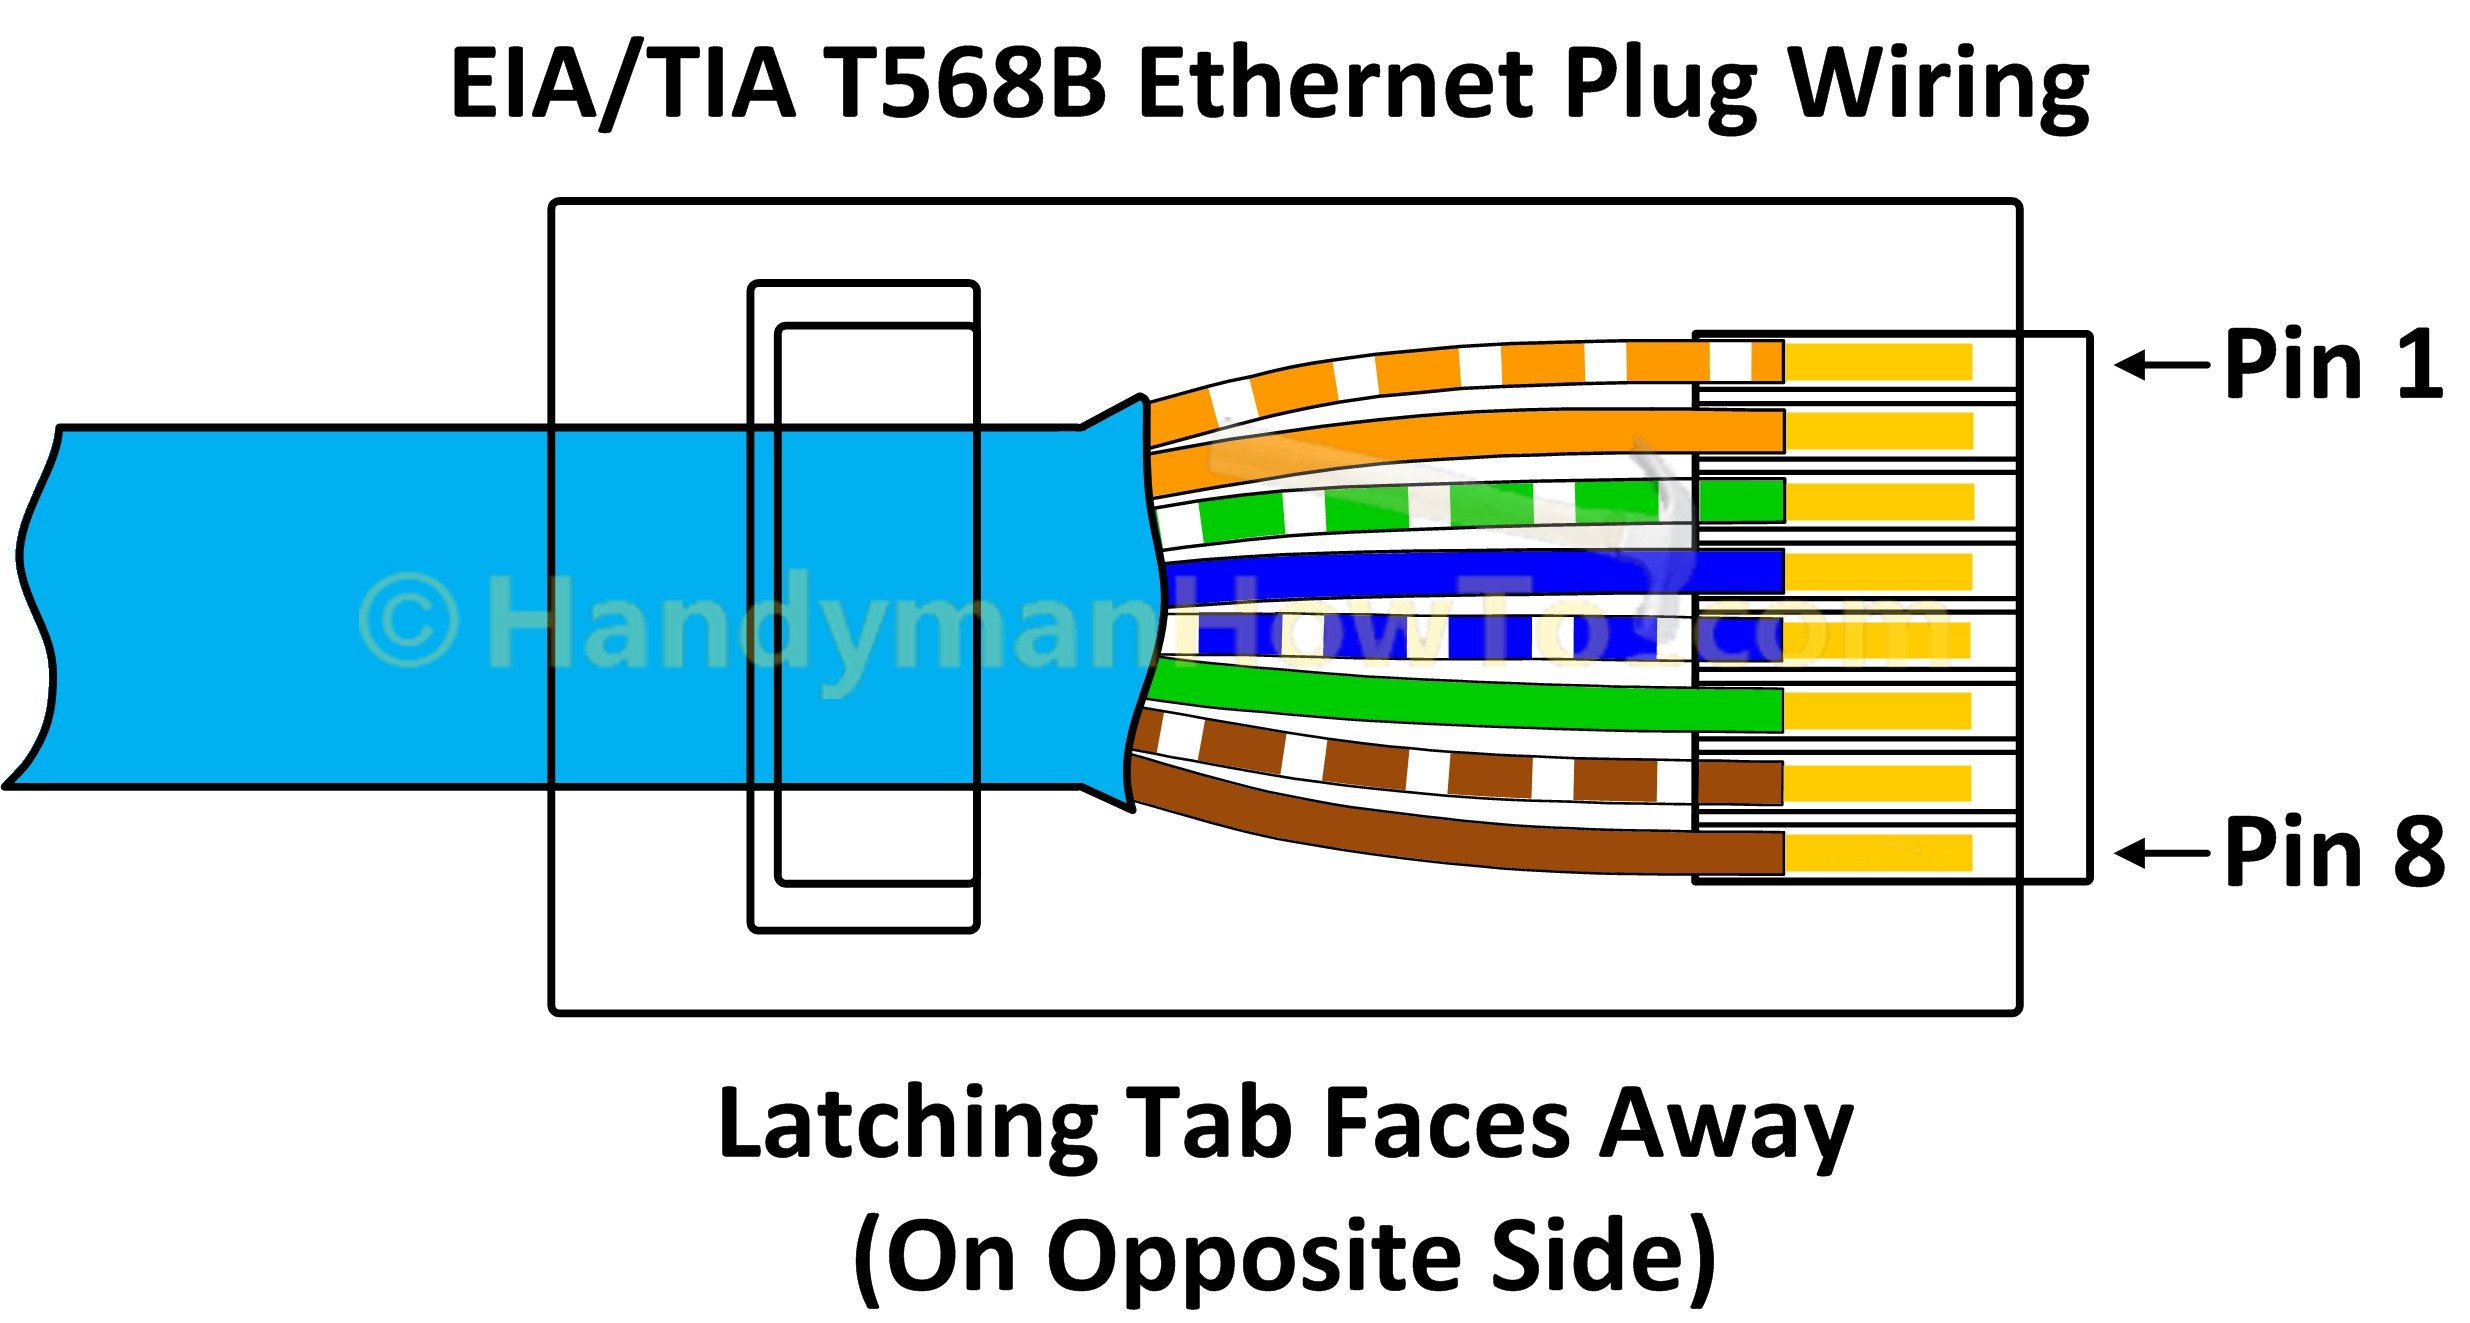 Wiring Diagram For Cat 5e Cable